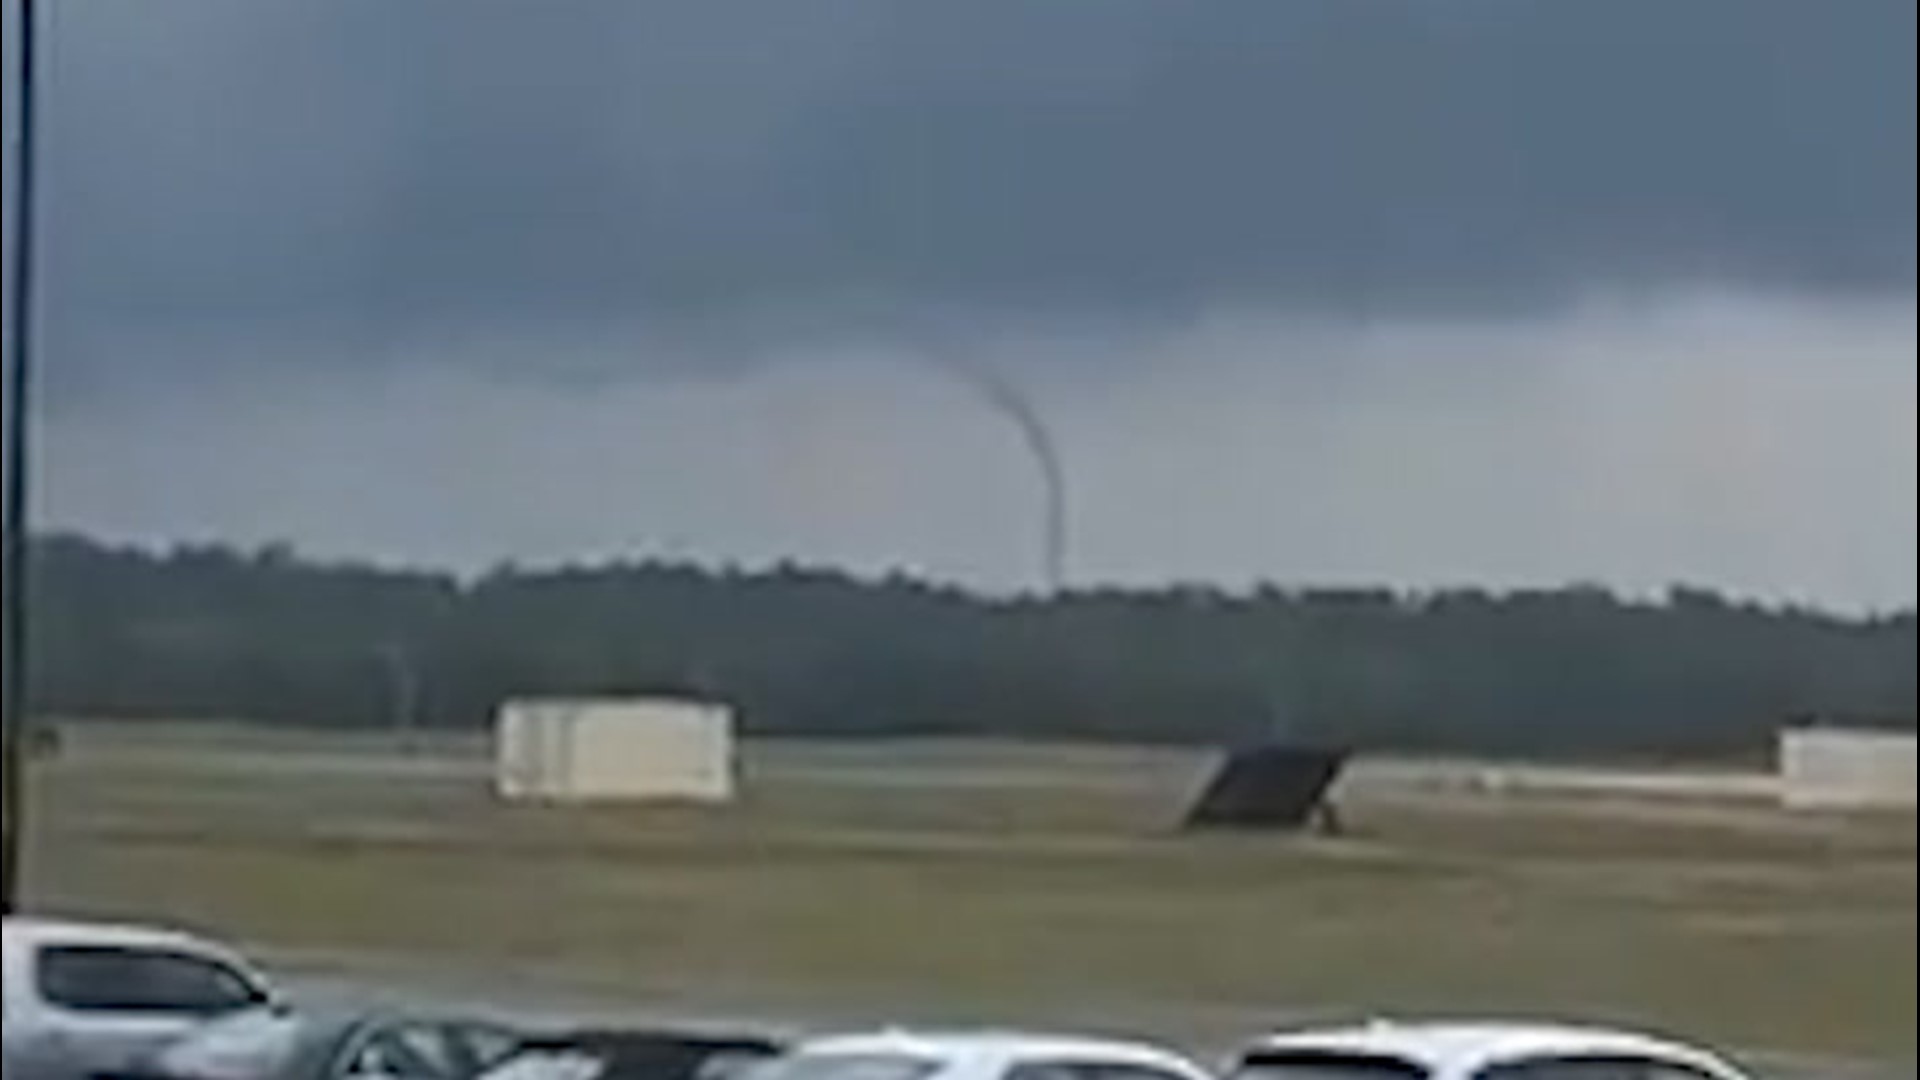 A rope tornado was spotted spinning near Niceville, Florida, on March 31.